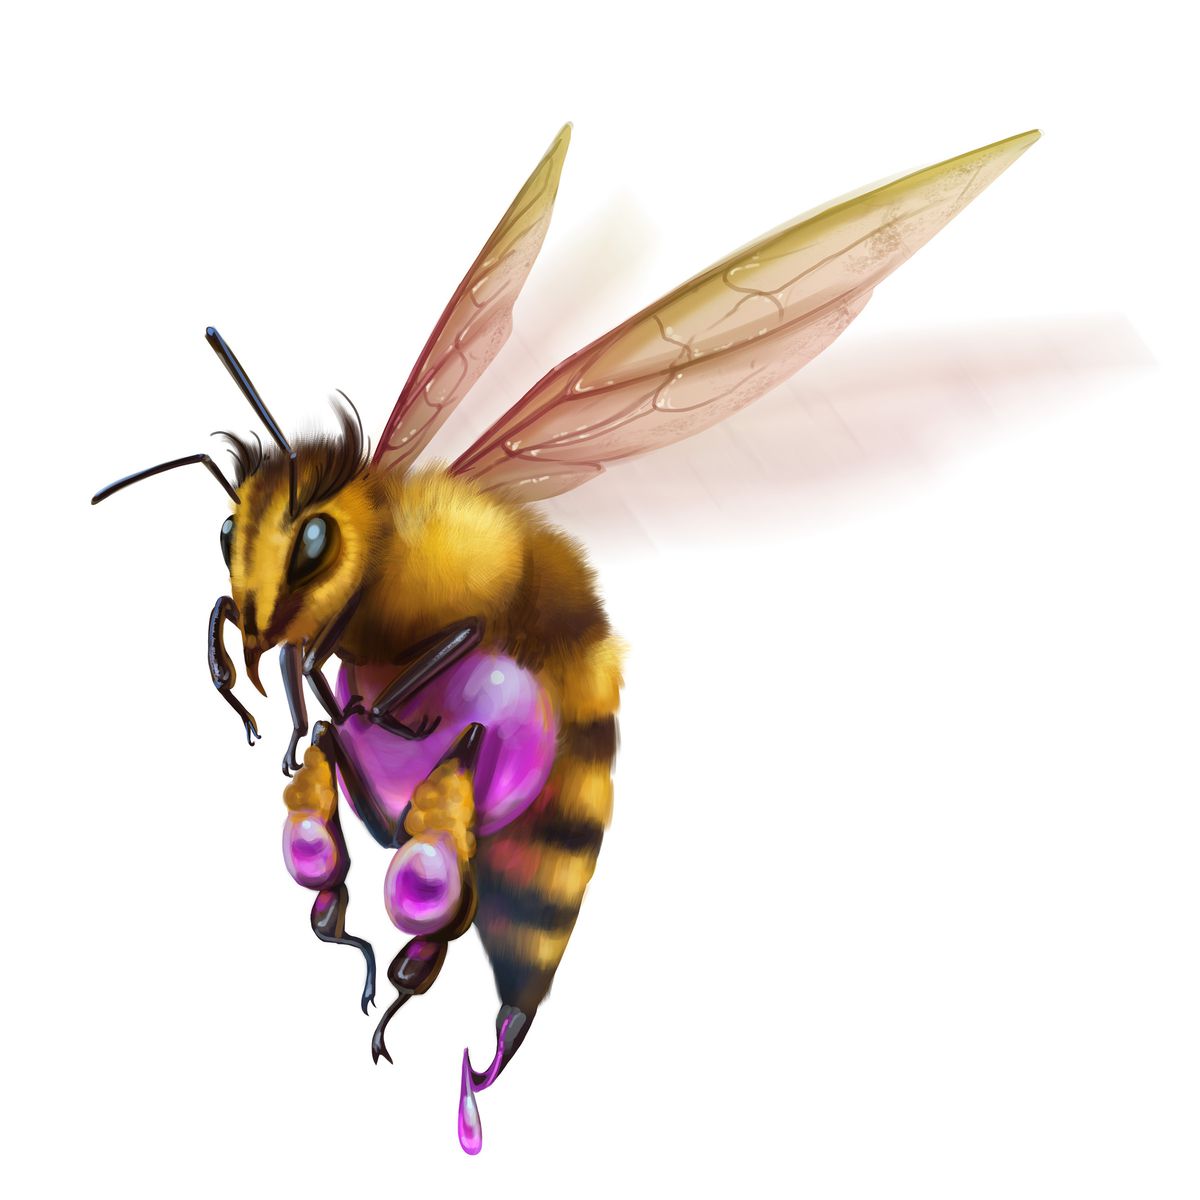 A large, furry bee with a purple sack above and on its legs. Purple ichor drops from its stinger.